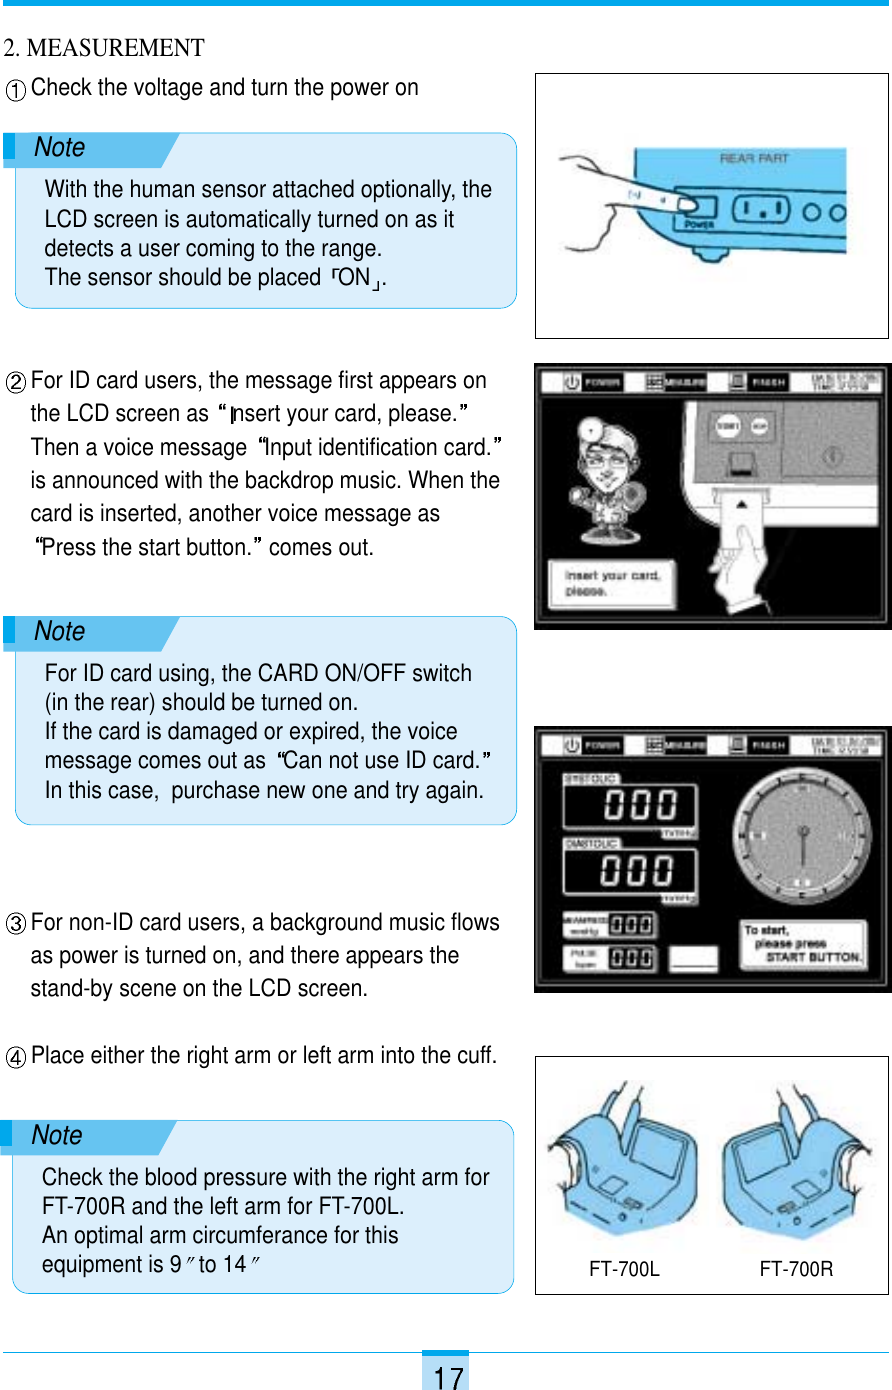 For non-ID card users, a background music flowsas power is turned on, and there appears thestand-by scene on the LCD screen. Place either the right arm or left arm into the cuff.For ID card users, the message first appears onthe LCD screen as  nsert your card, please.Then a voice message  Input identification card.is announced with the backdrop music. When thecard is inserted, another voice message asPress the start button. comes out.2. MEASUREMENTCheck the voltage and turn the power onFT-700L FT-700RNoteWith the human sensor attached optionally, theLCD screen is automatically turned on as itdetects a user coming to the range. The sensor should be placed  ON .NoteFor ID card using, the CARD ON/OFF switch(in the rear) should be turned on.If the card is damaged or expired, the voicemessage comes out as  Can not use ID card.In this case,  purchase new one and try again.NoteCheck the blood pressure with the right arm forFT-700R and the left arm for FT-700L.An optimal arm circumferance for thisequipment is 9 to 14